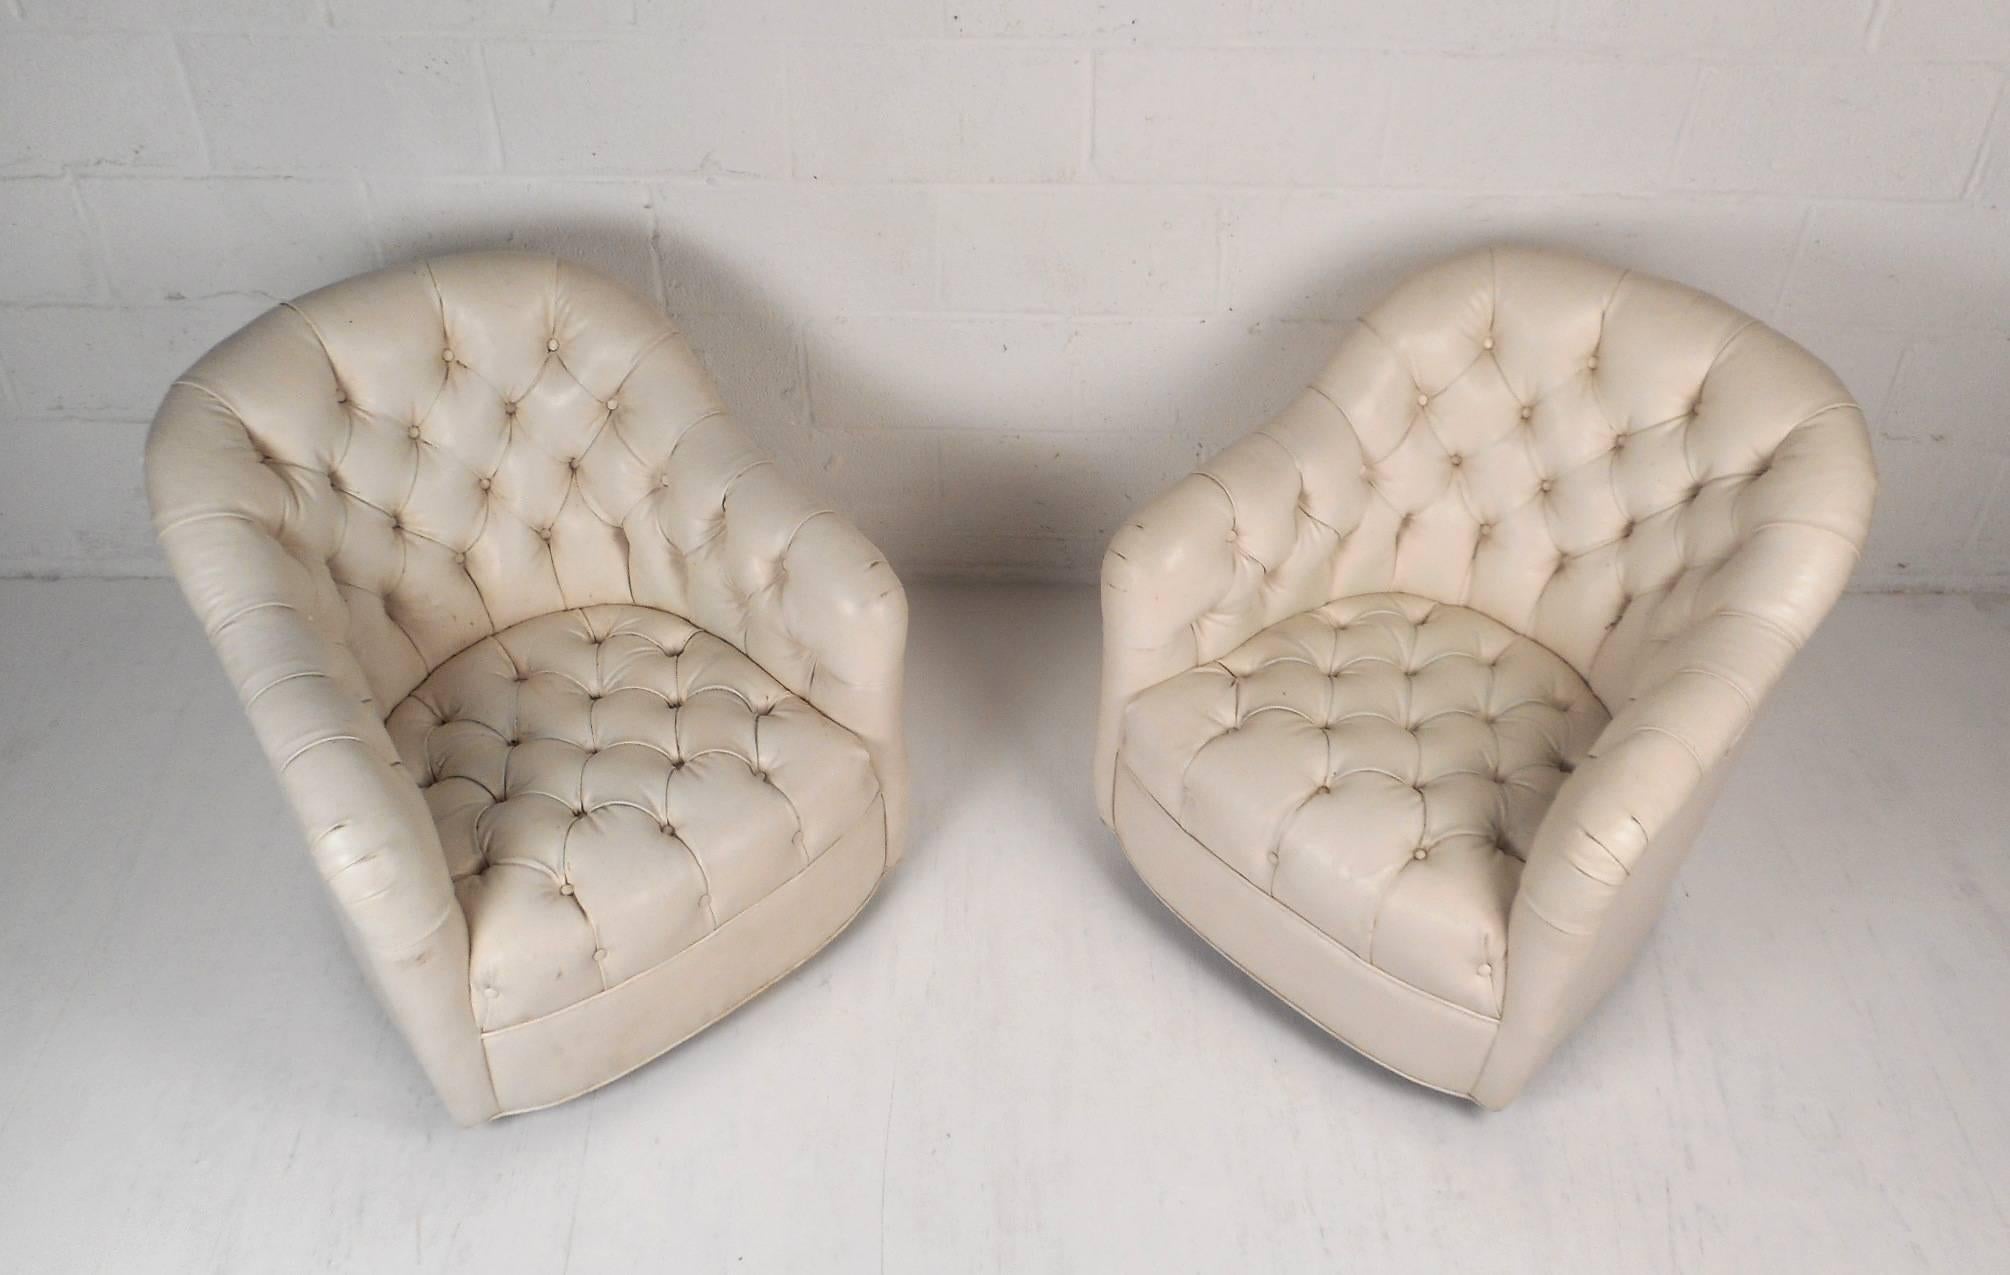 Stunning pair of vintage modern lounge chairs covered in white tufted vinyl. This wonderful pair has a comfortable barrel backrest with sloping arm rests. These stylish chairs have thick padded seating with deep tufts and wheels on the base ensuring